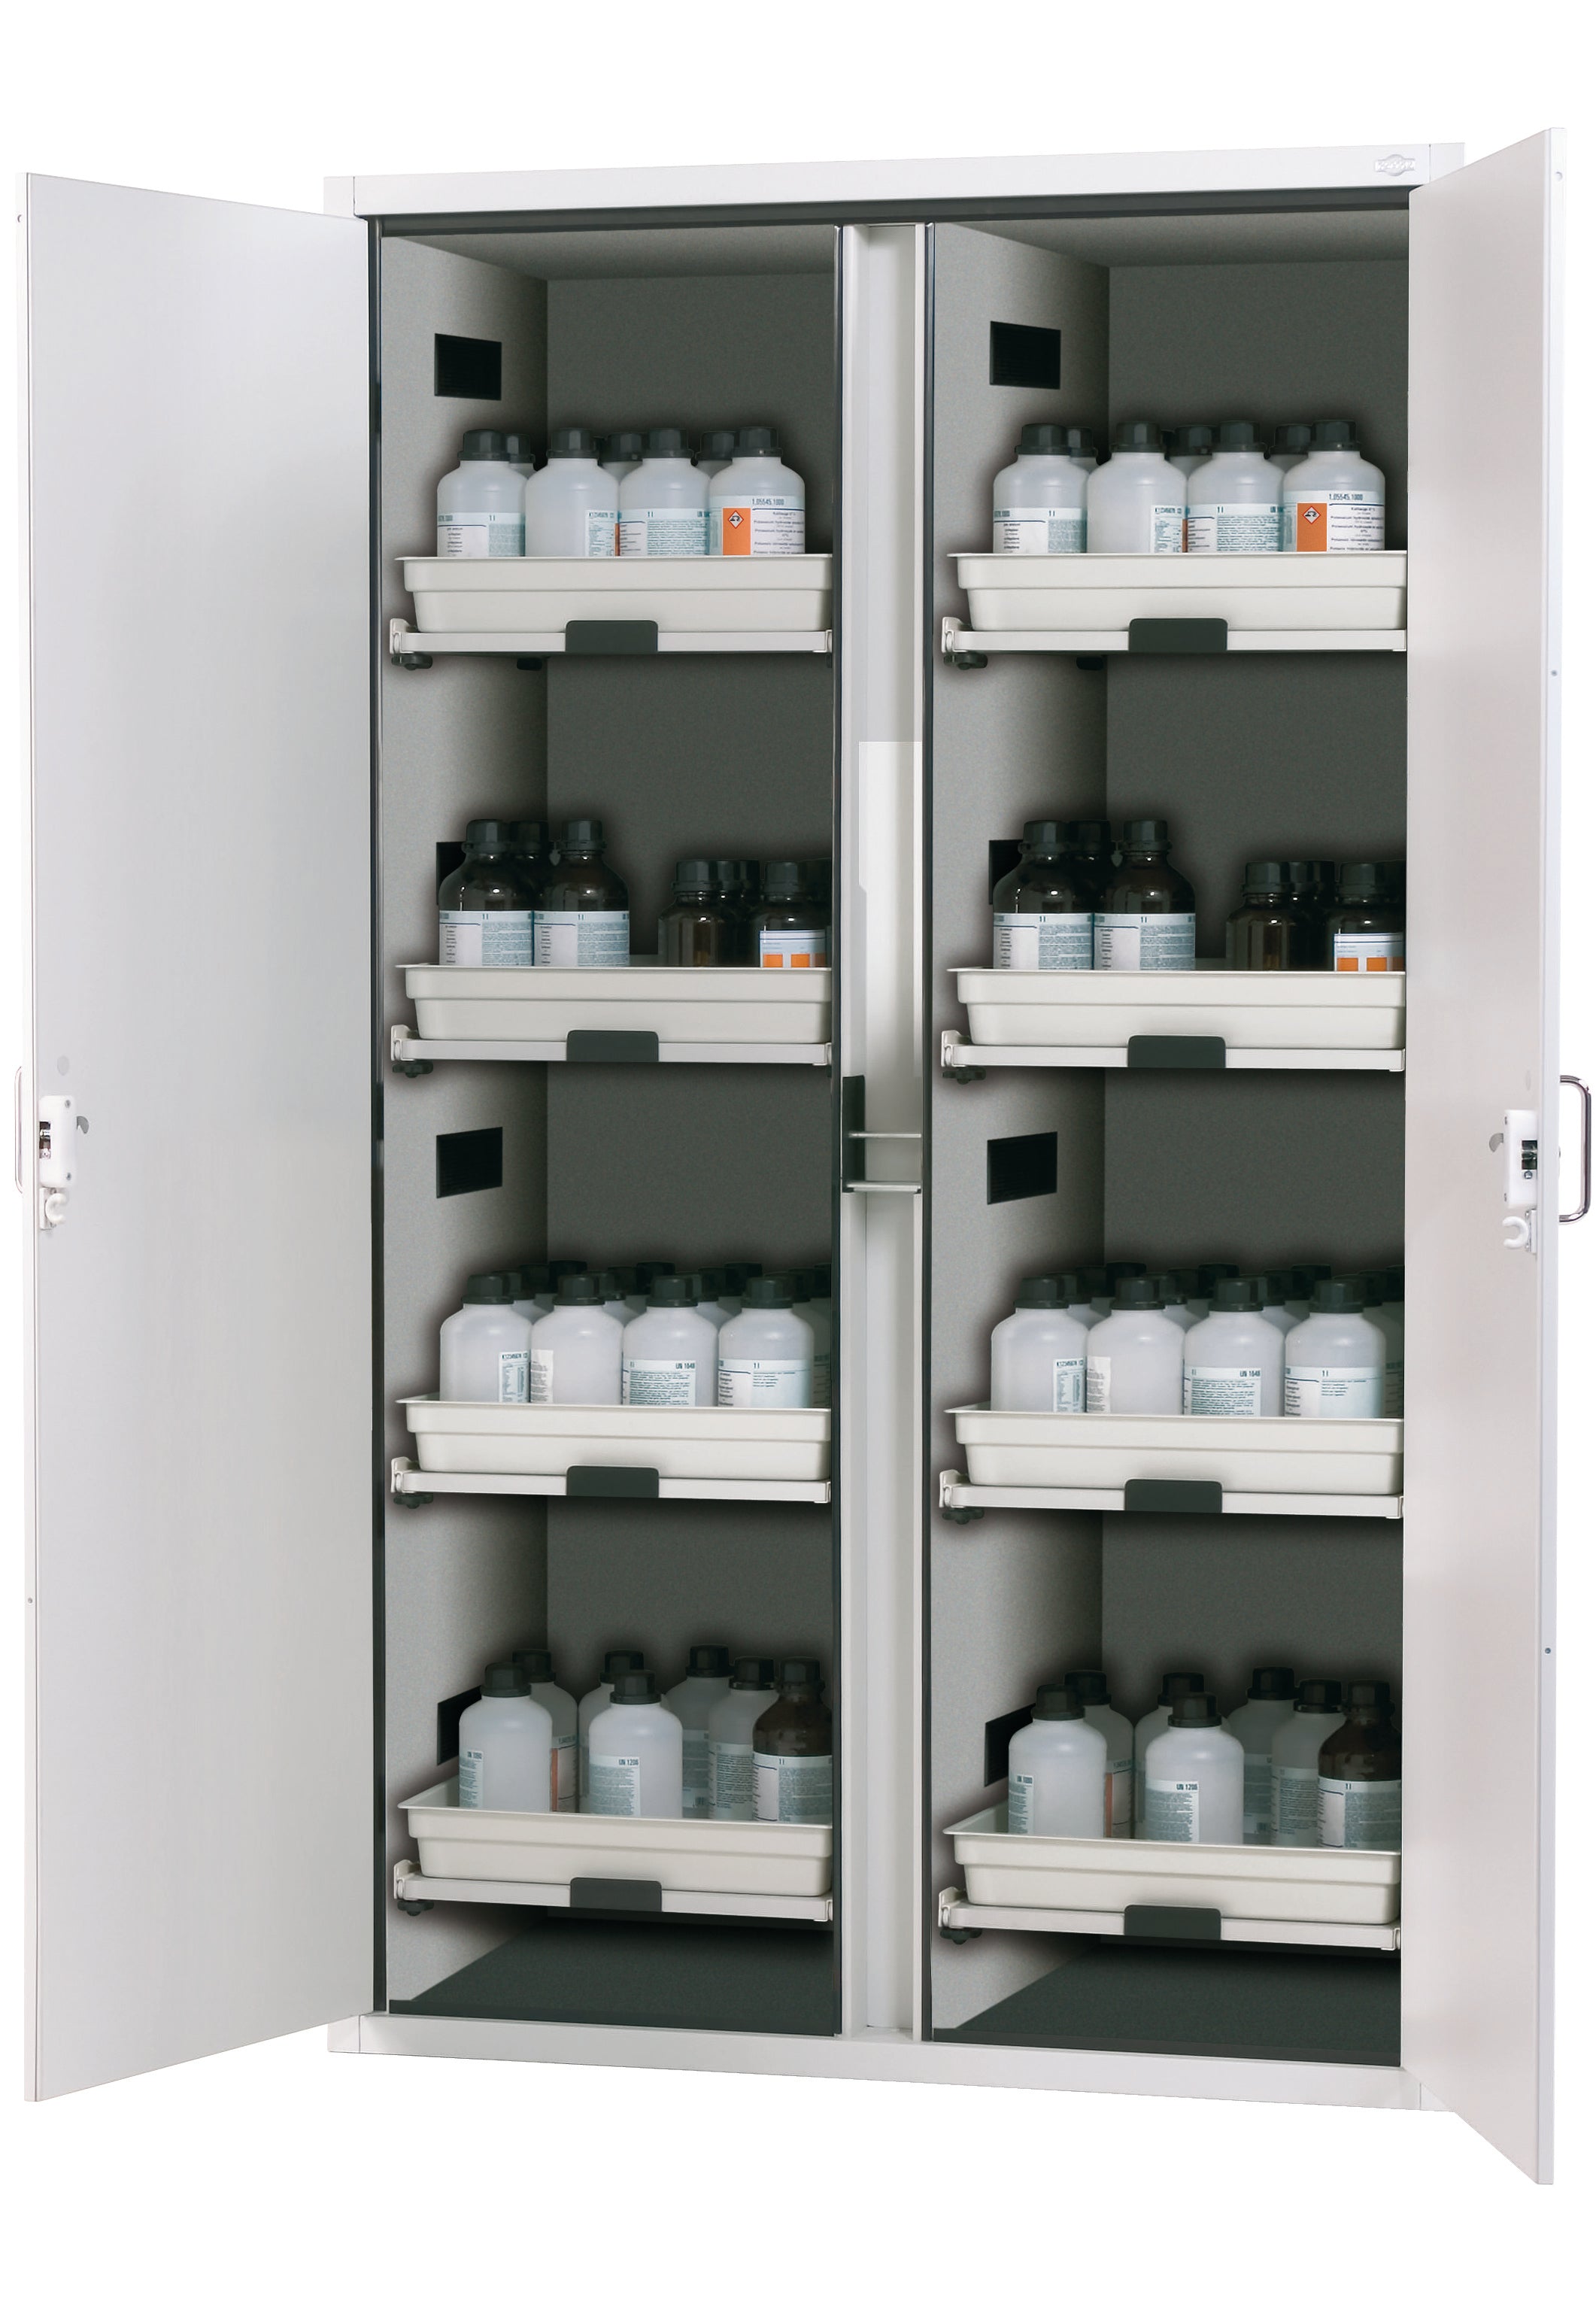 Acid and alkaline cabinet SL-CLASSIC model SL.196.120.MV in light gray RAL 7035 with 8x AbZ pull-out shelves (FP plate/polypropylene)